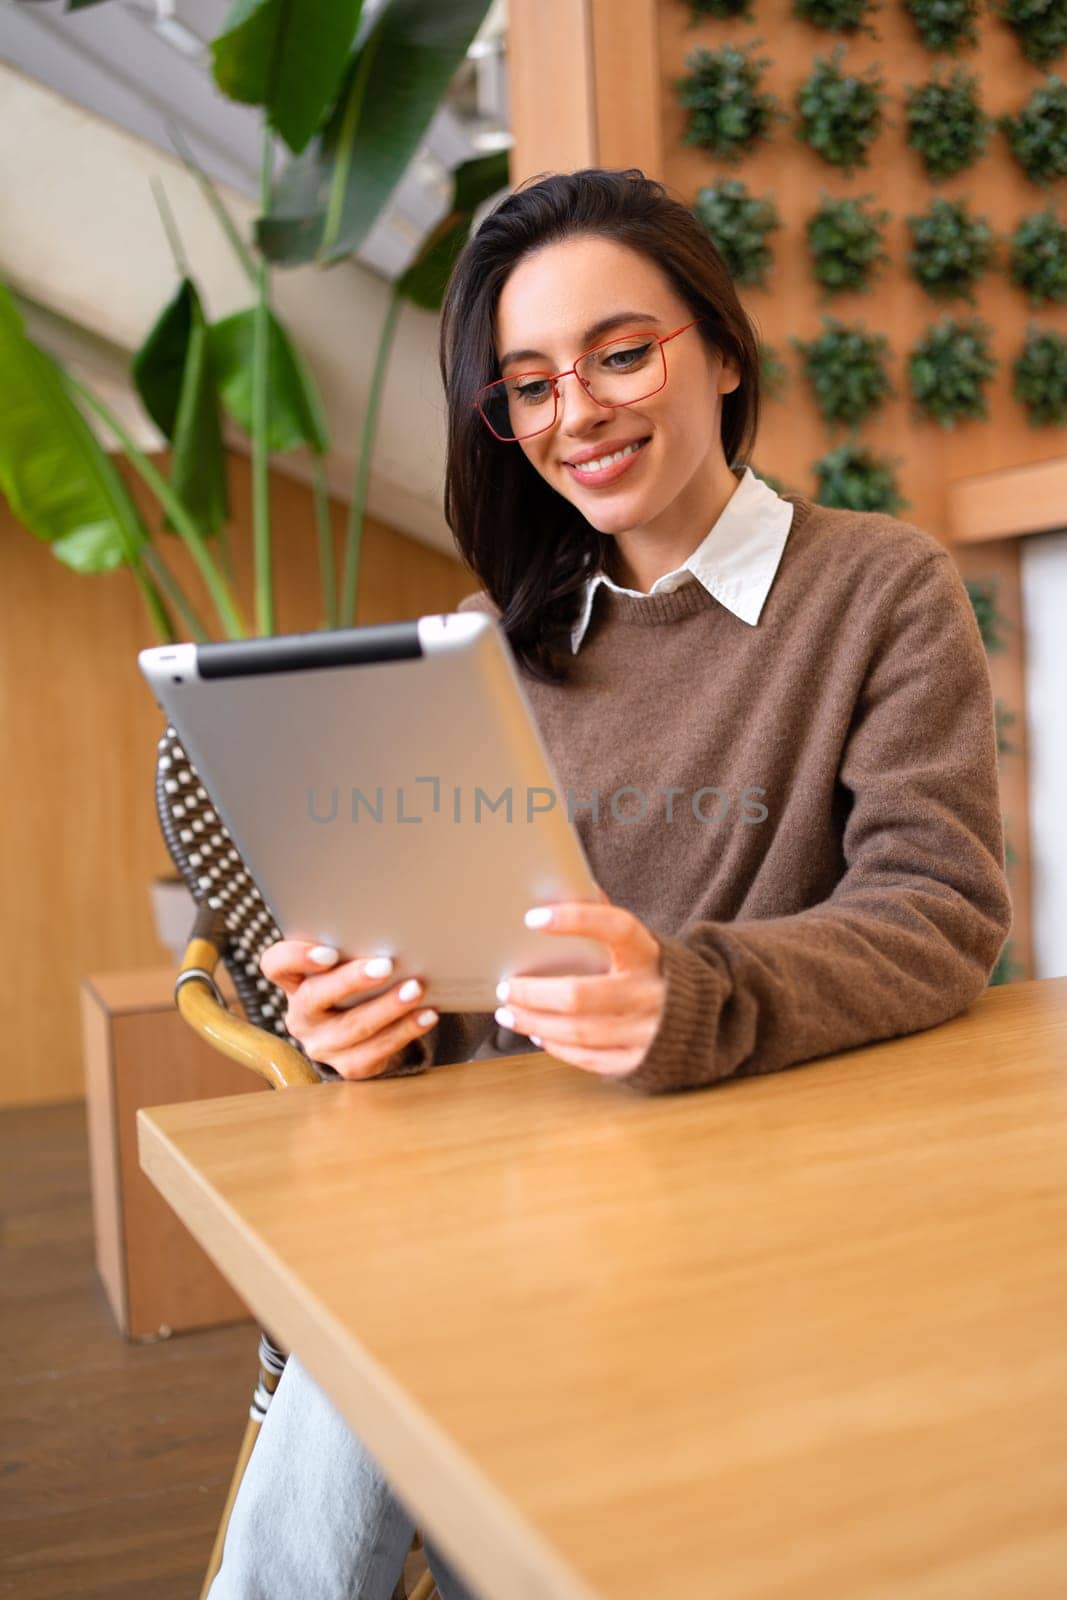 Portrait of happy woman using tablet computer sitting at her desk. Modern technologies and communication. Young female person studying or working online on touch pad looking at screen device. Vertical